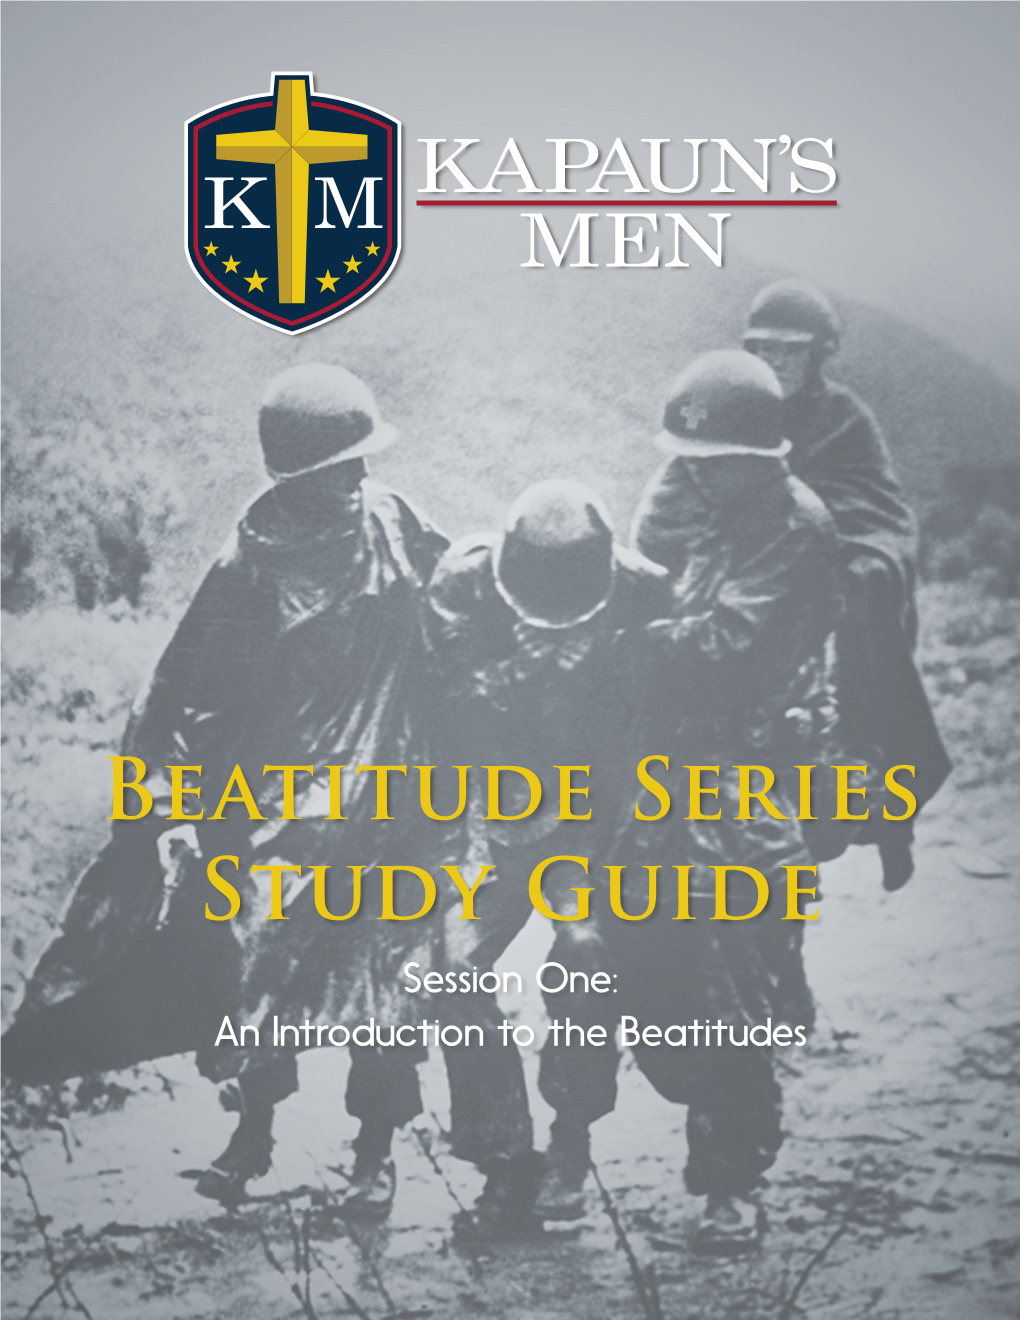 Beatitude Series Study Guide Session One: an Introduction to the Beatitudes COPYRIGHT